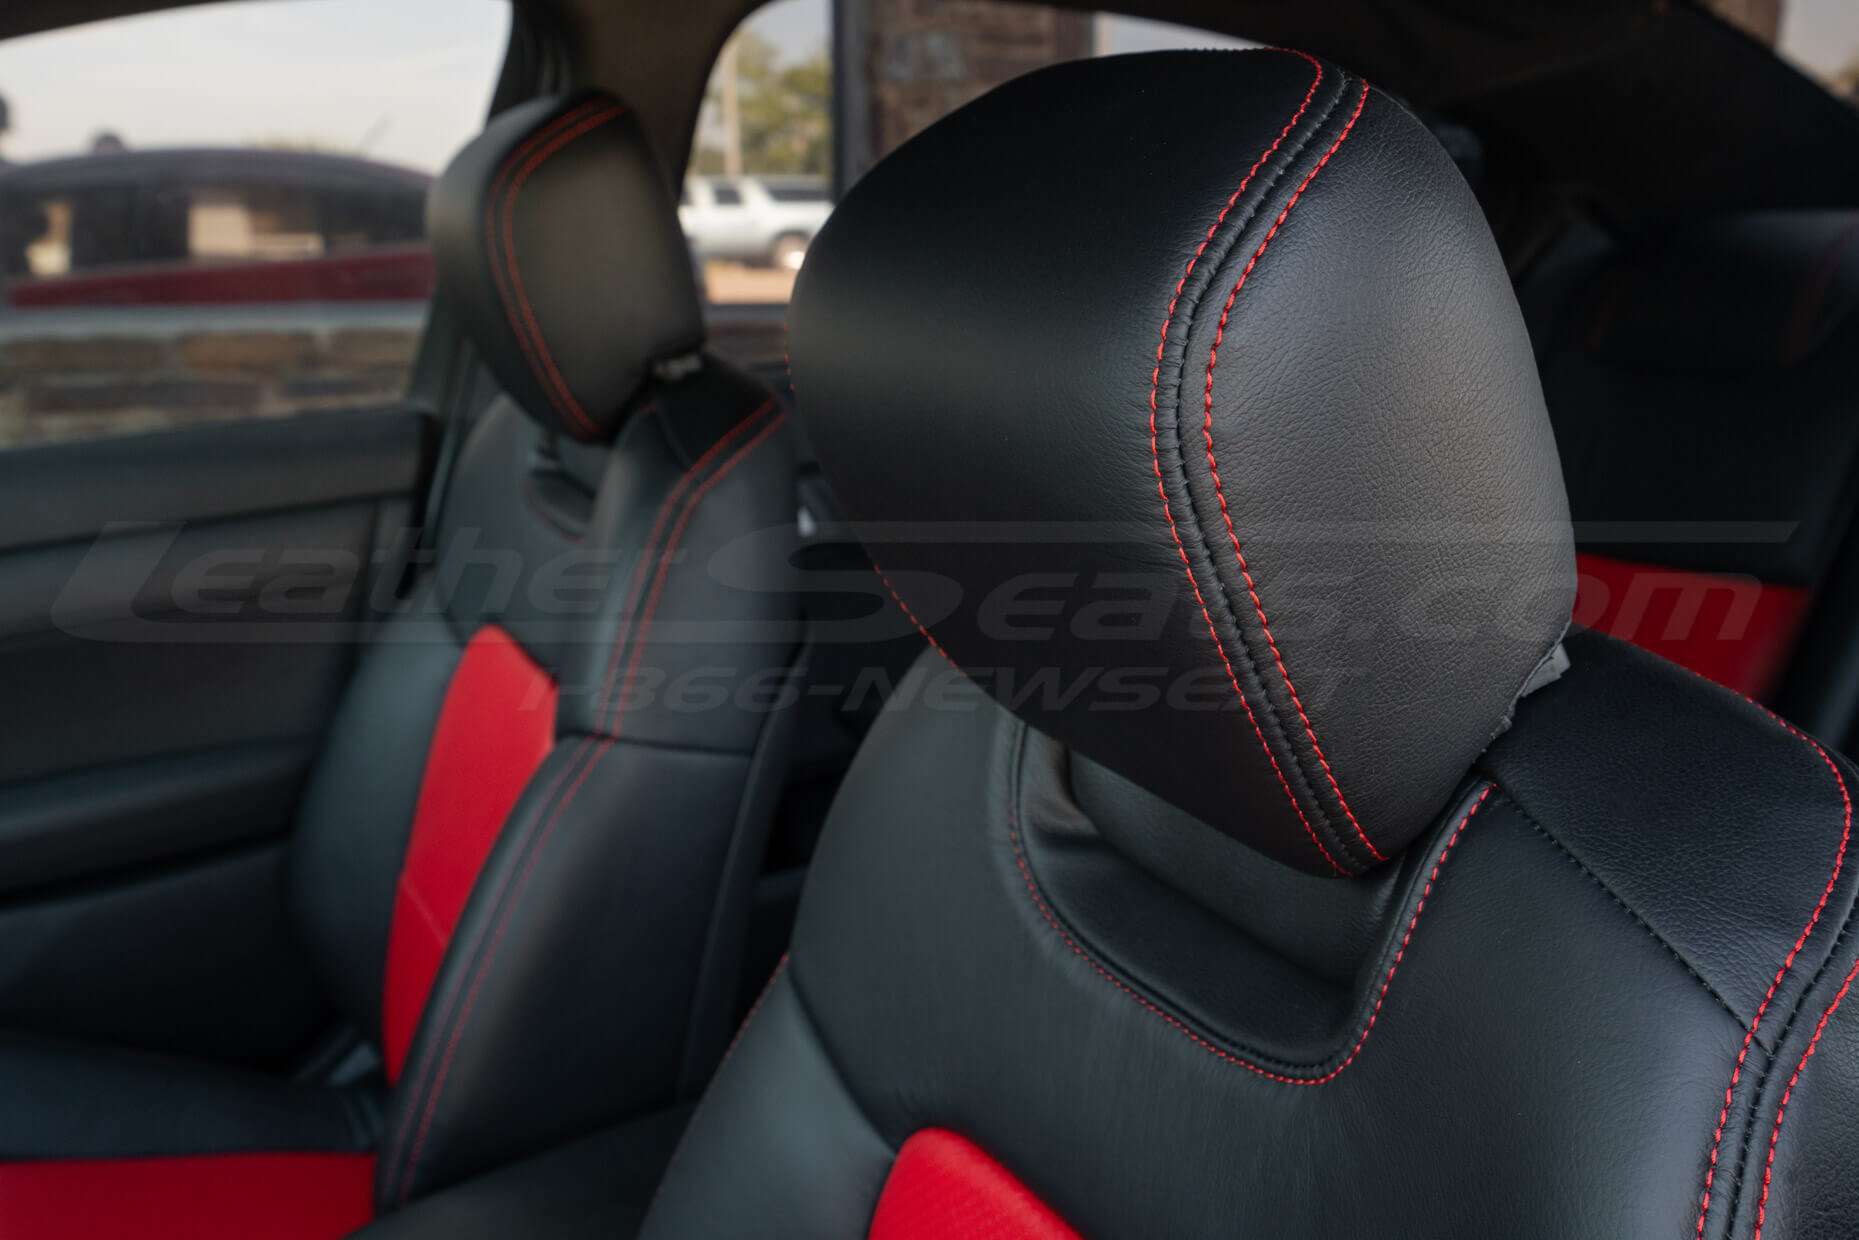 Pontiac G8 installed leather headrest with Bright Red stitching